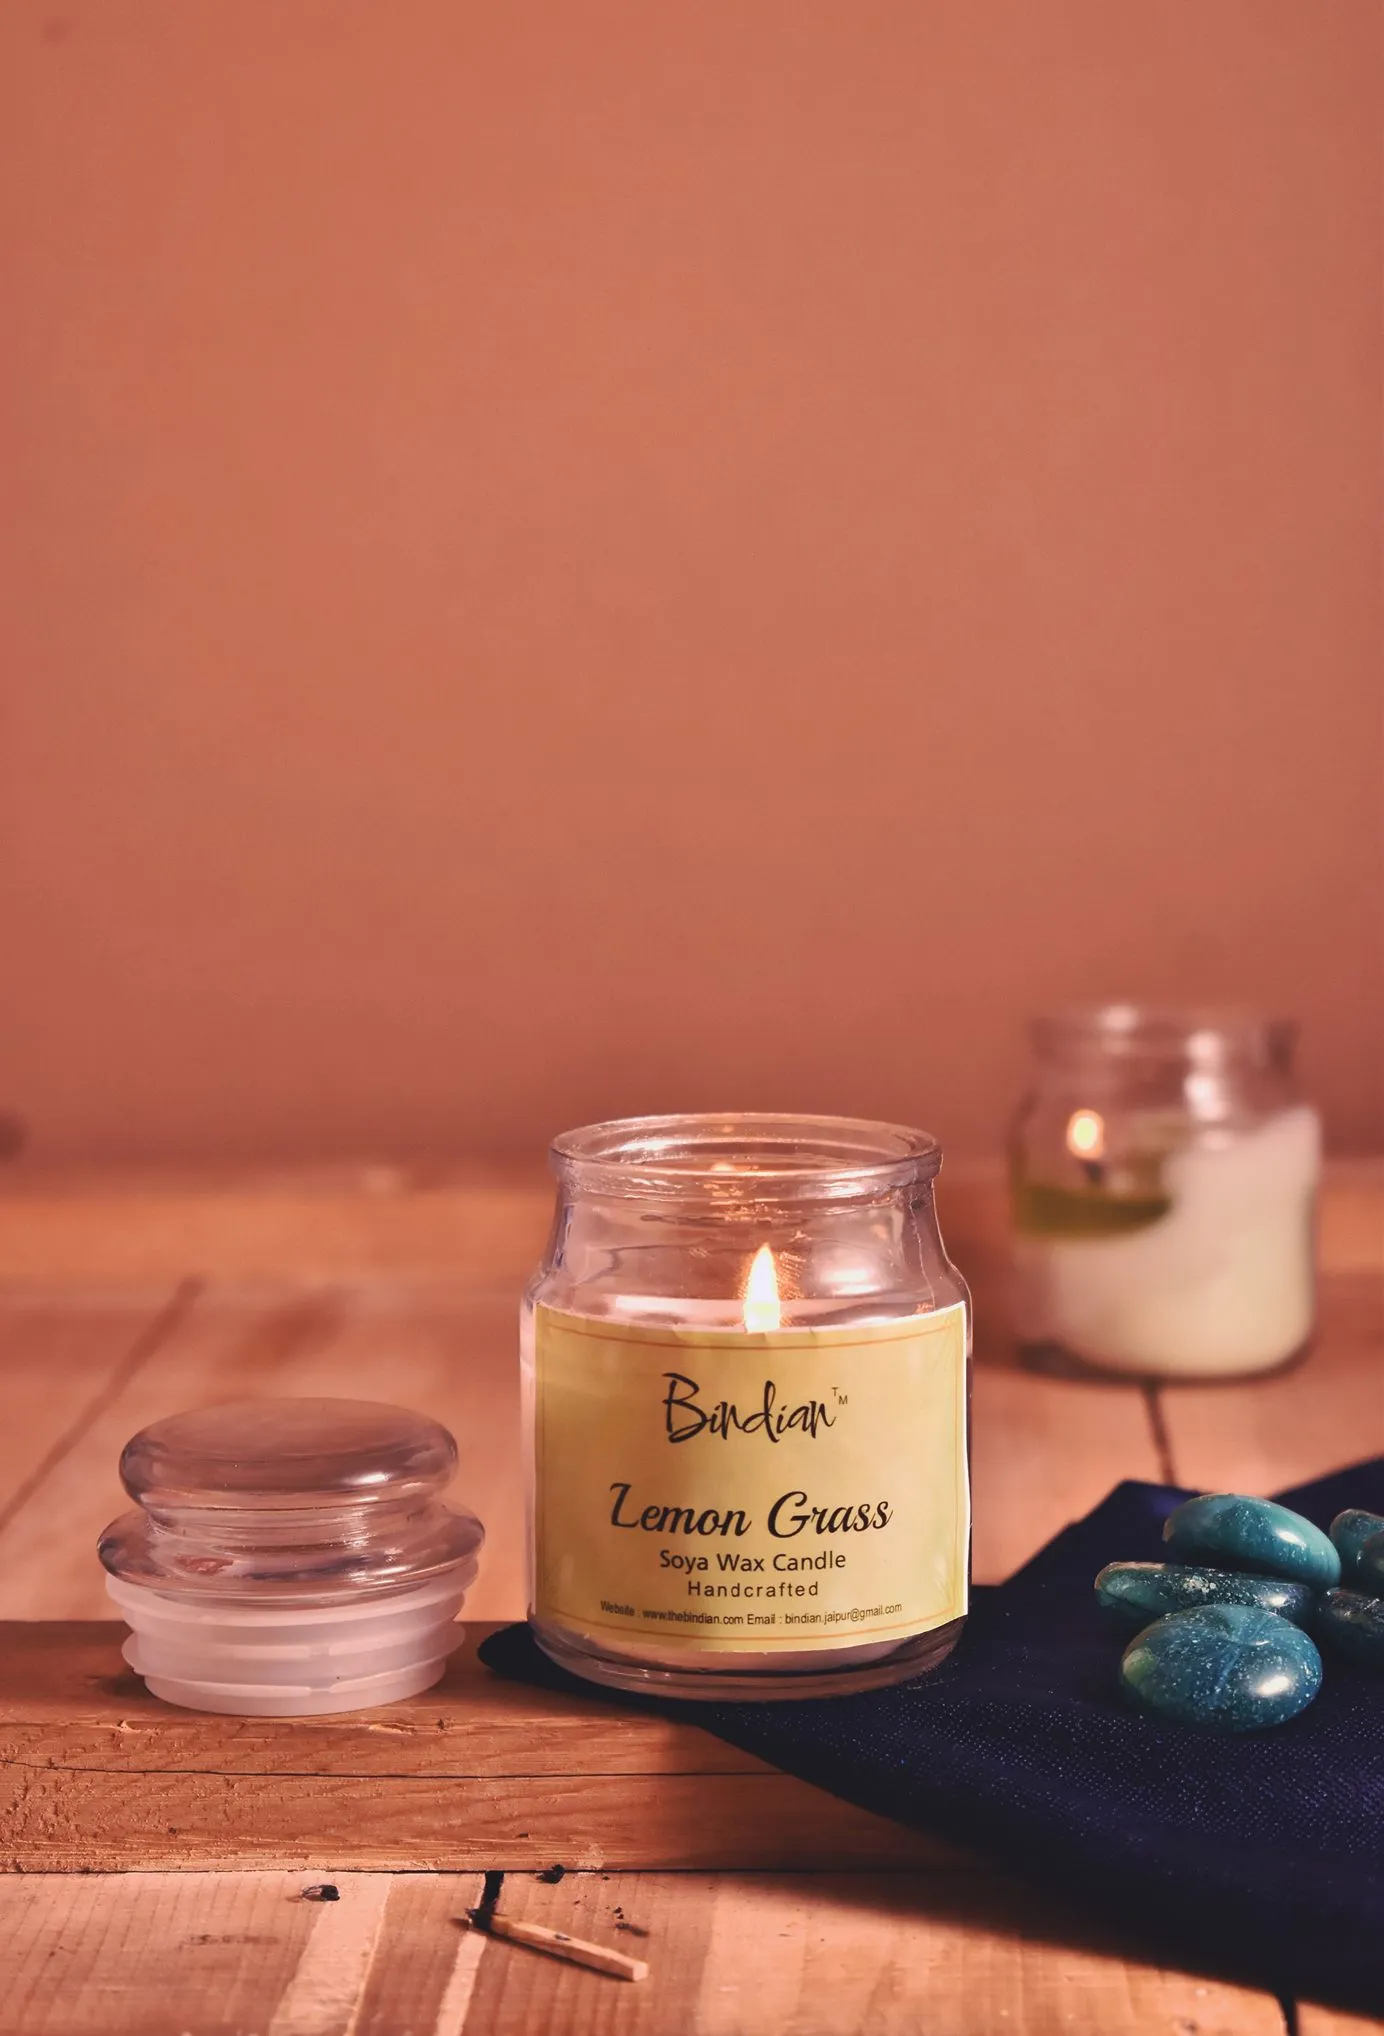 Lemon Grass Flavour Scented Candle, 14-18 Hours Long Burning Time